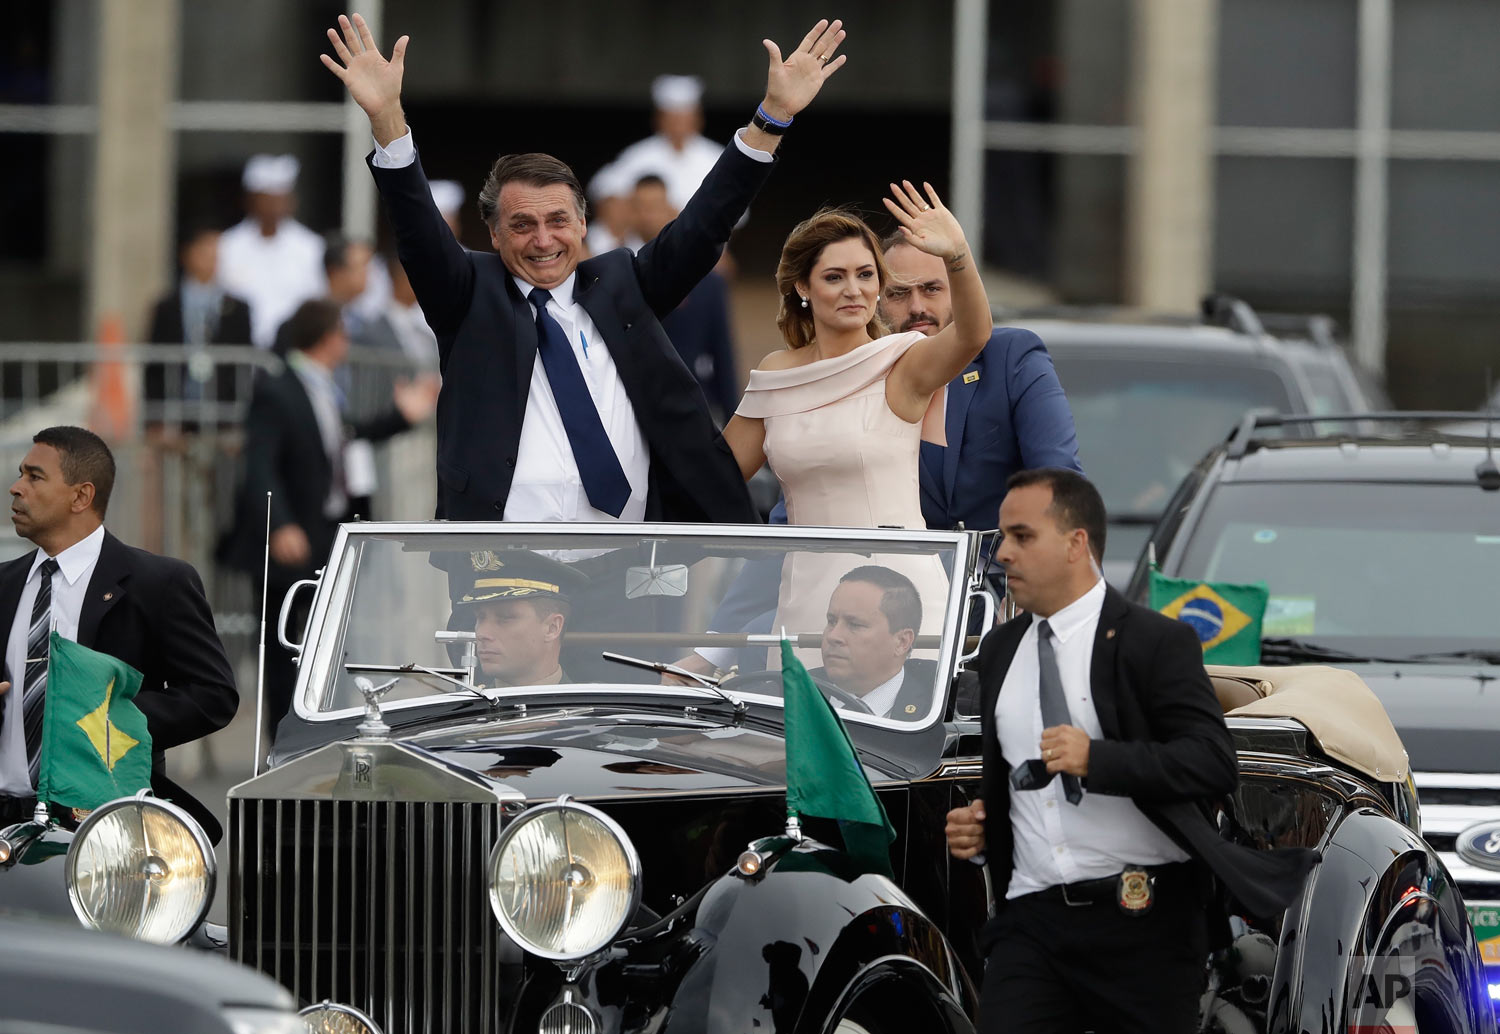  Flanked by first lady Michelle Bolsonaro, Brazil's President Jair Bolsonaro, waves after his swearing-in ceremony in Brasilia, Brazil, Jan. 1, 2019. (AP Photo/Andre Penner) 